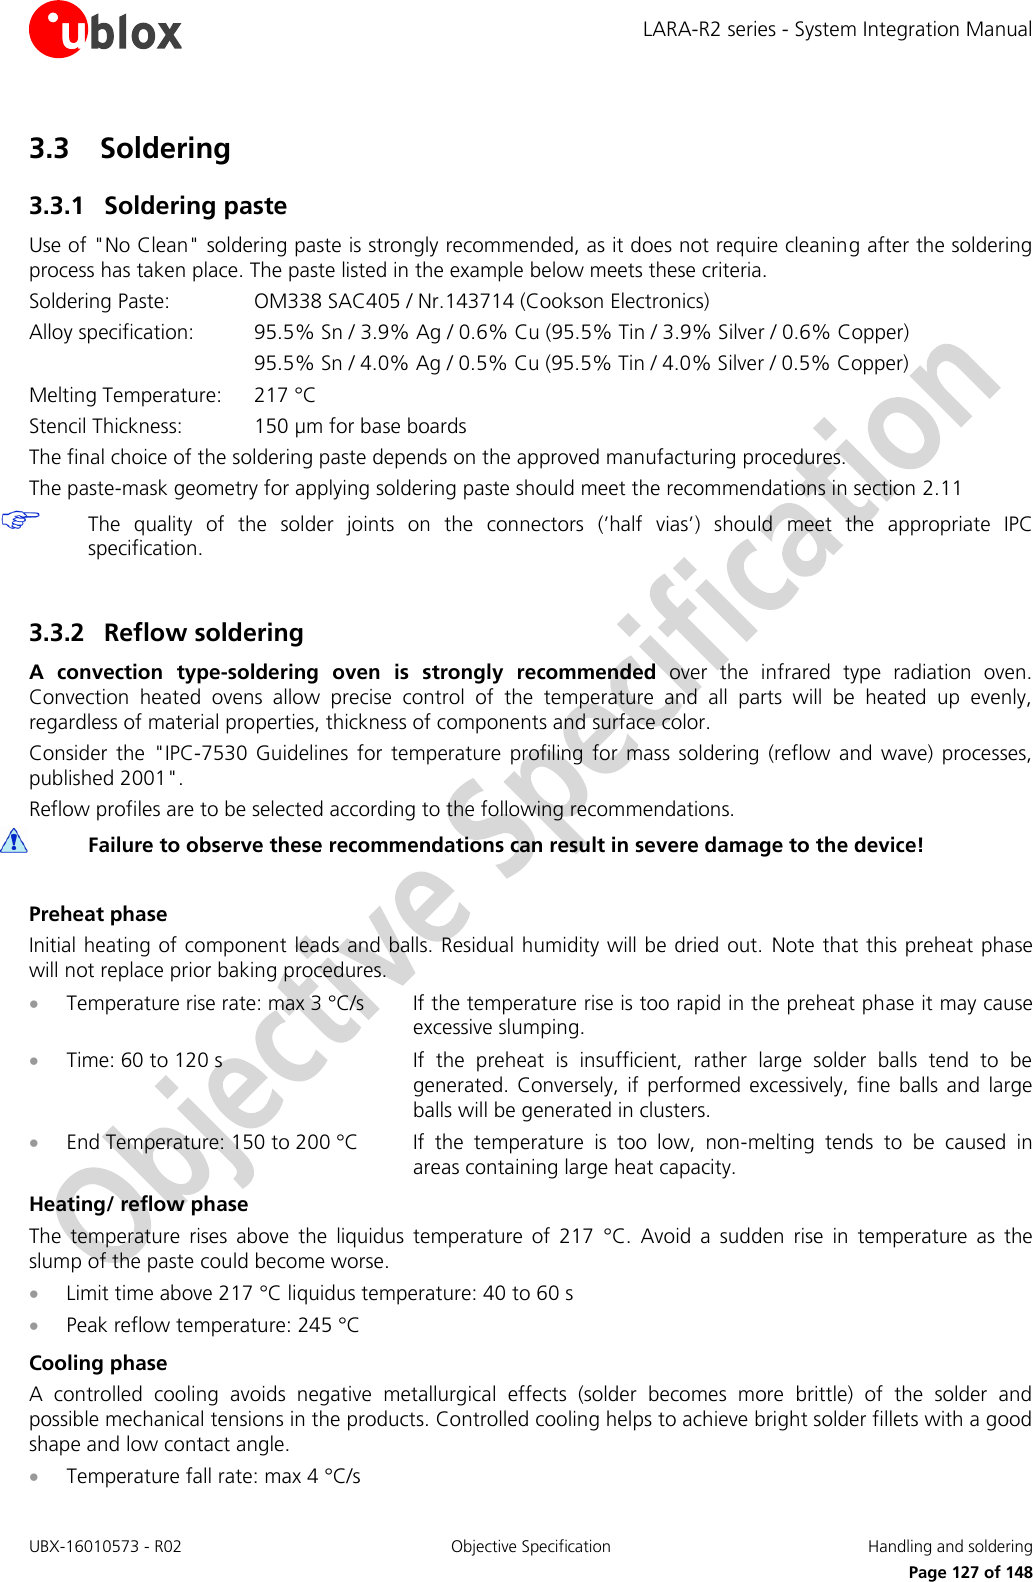 LARA-R2 series - System Integration Manual UBX-16010573 - R02  Objective Specification  Handling and soldering     Page 127 of 148 3.3 Soldering 3.3.1 Soldering paste Use of &quot;No Clean&quot; soldering paste is strongly recommended, as it does not require cleaning after the soldering process has taken place. The paste listed in the example below meets these criteria. Soldering Paste:    OM338 SAC405 / Nr.143714 (Cookson Electronics) Alloy specification:  95.5% Sn / 3.9% Ag / 0.6% Cu (95.5% Tin / 3.9% Silver / 0.6% Copper)       95.5% Sn / 4.0% Ag / 0.5% Cu (95.5% Tin / 4.0% Silver / 0.5% Copper) Melting Temperature:   217 °C Stencil Thickness:  150 µm for base boards The final choice of the soldering paste depends on the approved manufacturing procedures. The paste-mask geometry for applying soldering paste should meet the recommendations in section 2.11  The  quality  of  the  solder  joints  on  the  connectors  (’half  vias’)  should  meet  the  appropriate  IPC specification.  3.3.2 Reflow soldering A  convection  type-soldering  oven  is  strongly  recommended  over  the  infrared  type  radiation  oven. Convection  heated  ovens  allow  precise  control  of  the  temperature  and  all  parts  will  be  heated  up  evenly, regardless of material properties, thickness of components and surface color. Consider  the  &quot;IPC-7530  Guidelines  for  temperature  profiling  for  mass  soldering  (reflow  and  wave)  processes, published 2001&quot;. Reflow profiles are to be selected according to the following recommendations.  Failure to observe these recommendations can result in severe damage to the device!  Preheat phase Initial heating of component leads and balls. Residual humidity will be dried out.  Note that this preheat phase will not replace prior baking procedures.  Temperature rise rate: max 3 °C/s  If the temperature rise is too rapid in the preheat phase it may cause excessive slumping.  Time: 60 to 120 s  If  the  preheat  is  insufficient,  rather  large  solder  balls  tend  to  be generated.  Conversely,  if  performed excessively,  fine  balls  and  large balls will be generated in clusters.  End Temperature: 150 to 200 °C  If  the  temperature  is  too  low,  non-melting  tends  to  be  caused  in areas containing large heat capacity. Heating/ reflow phase The  temperature  rises  above  the  liquidus  temperature  of  217  °C.  Avoid  a  sudden  rise  in  temperature  as  the slump of the paste could become worse.  Limit time above 217 °C liquidus temperature: 40 to 60 s  Peak reflow temperature: 245 °C Cooling phase A  controlled  cooling  avoids  negative  metallurgical  effects  (solder  becomes  more  brittle)  of  the  solder  and possible mechanical tensions in the products. Controlled cooling helps to achieve bright solder fillets with a good shape and low contact angle.  Temperature fall rate: max 4 °C/s 